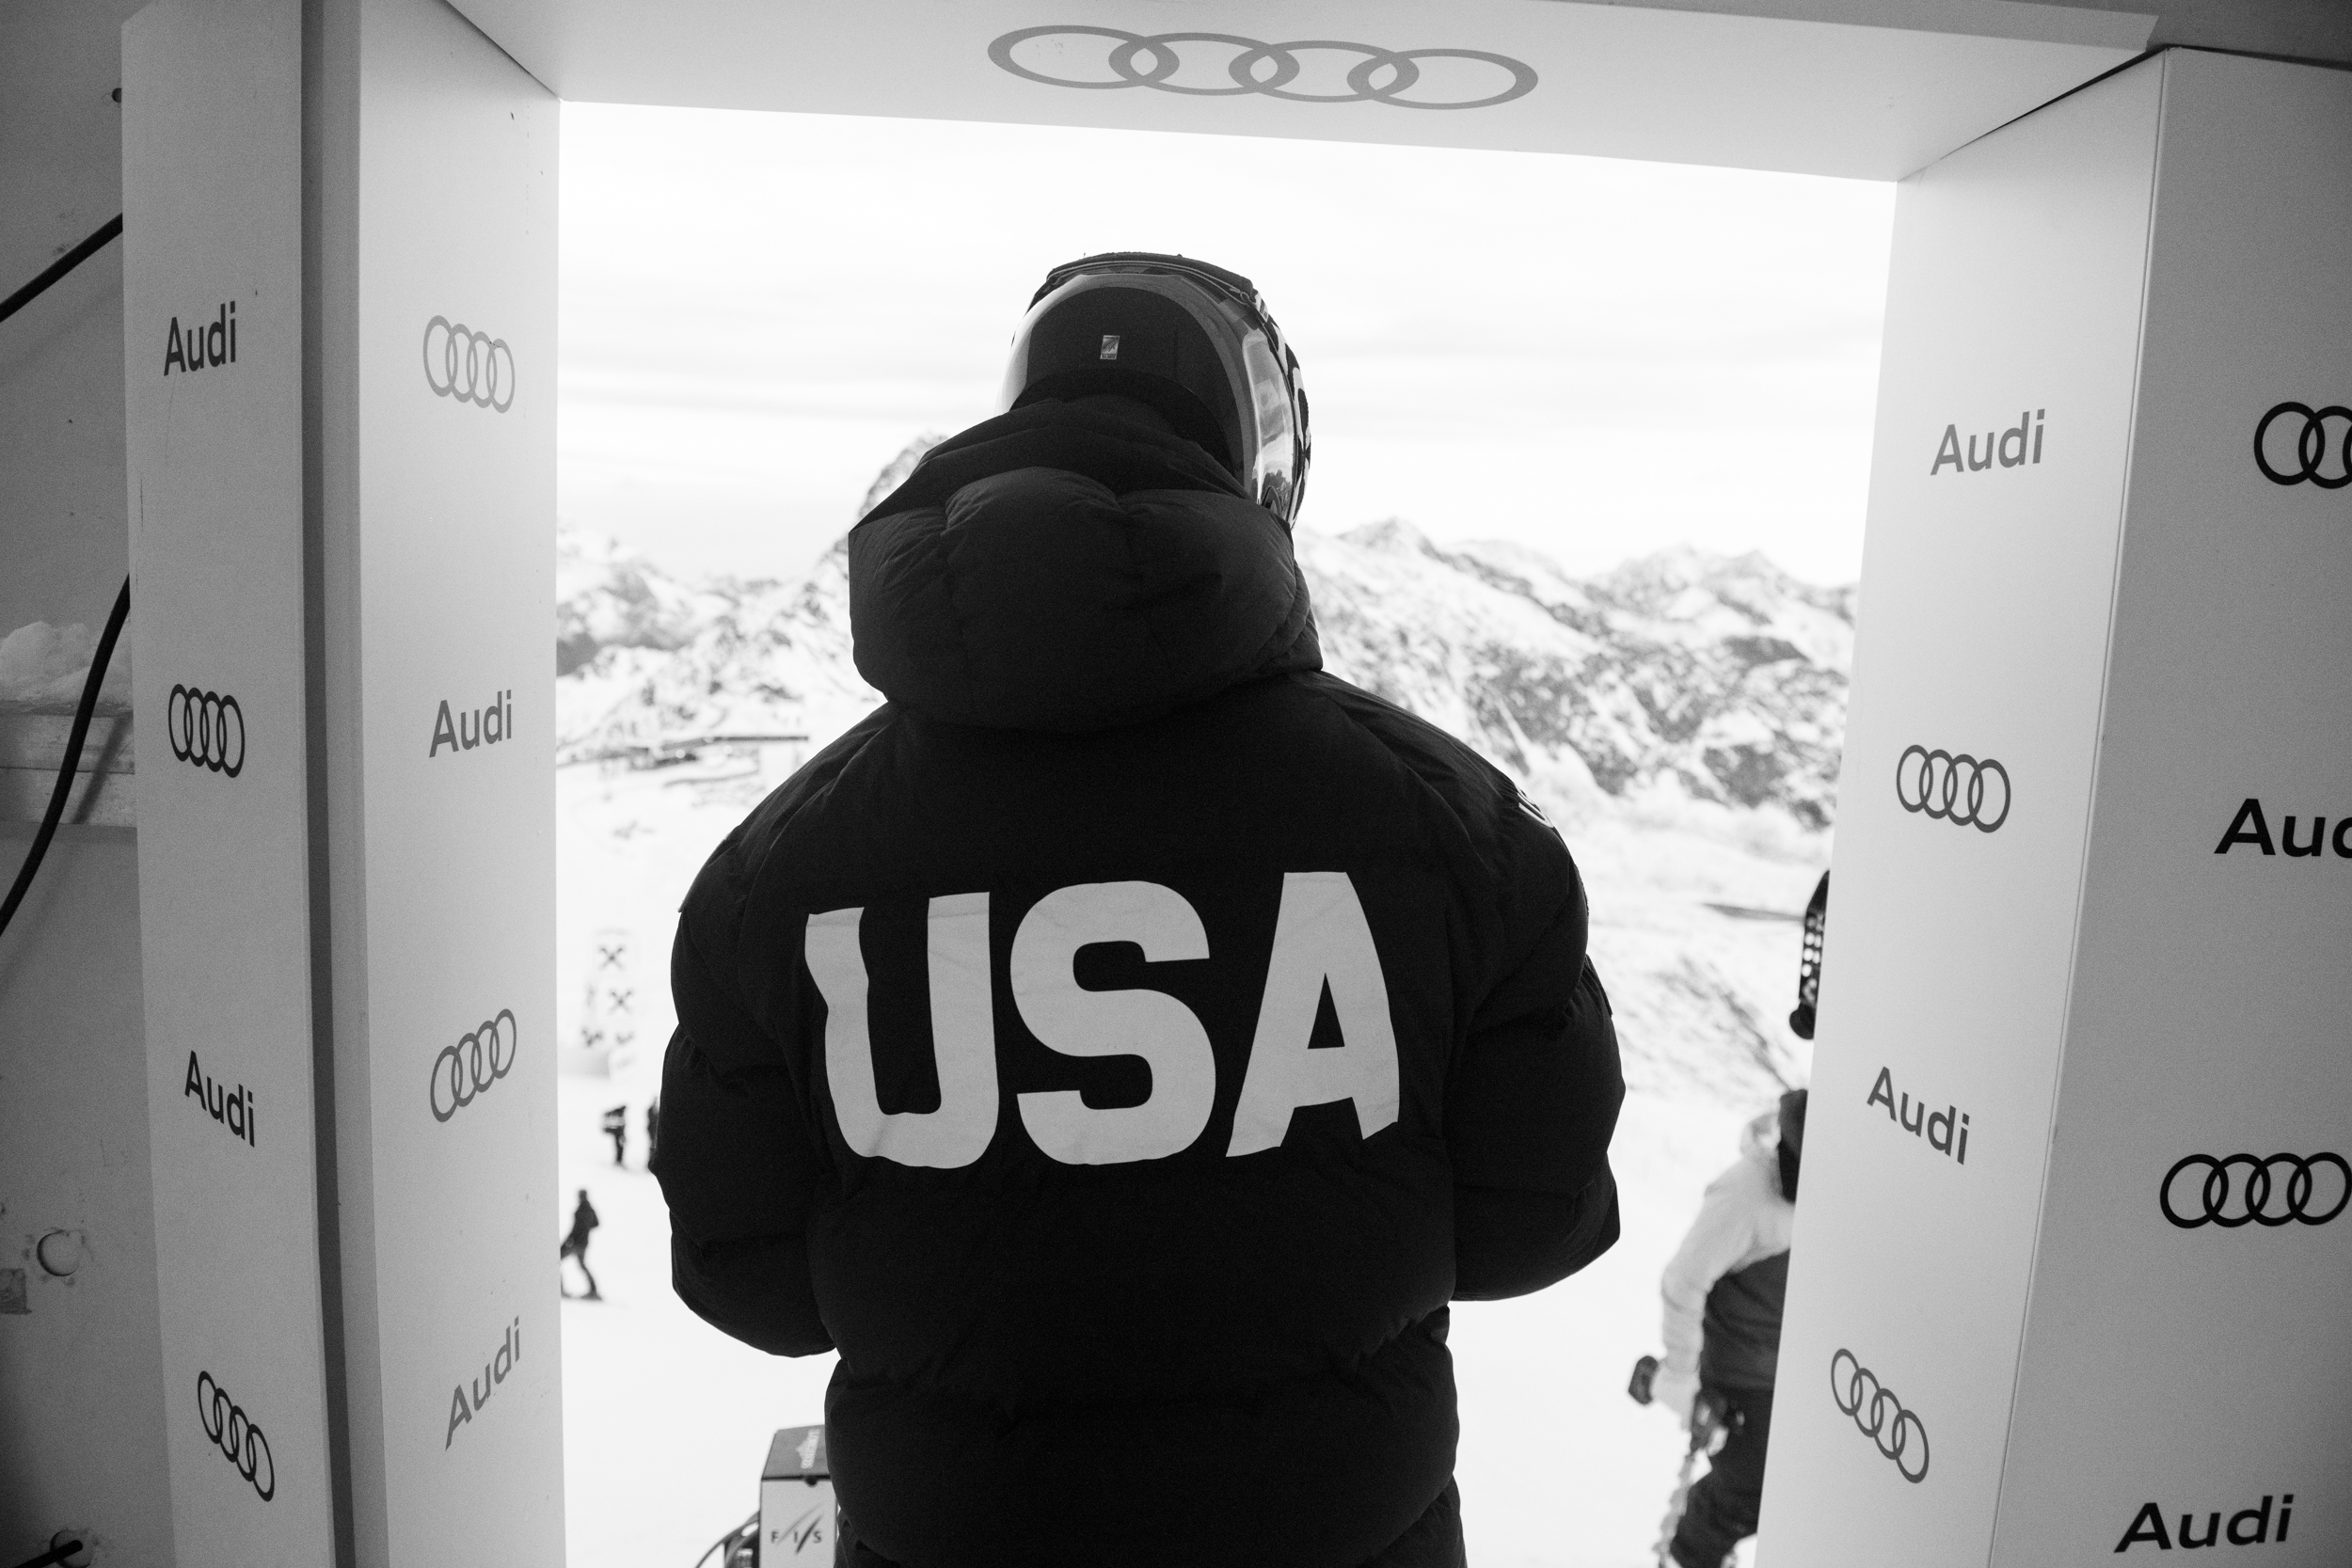 Kappa will be the first single brand official sponsor of US Ski & Snowboard